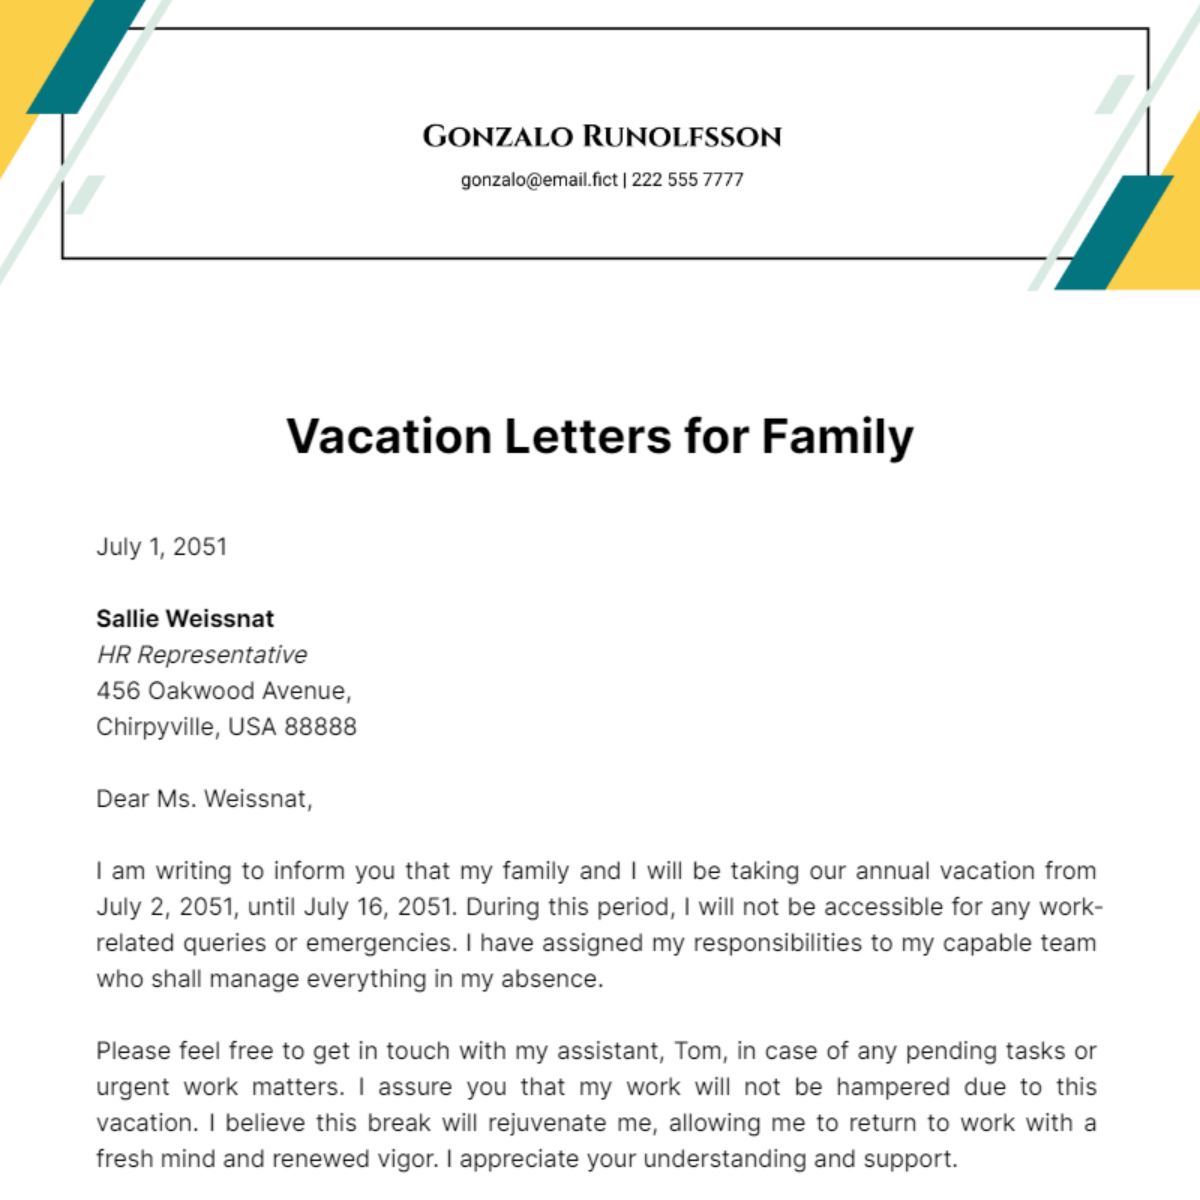 Vacation Letter for Family Template